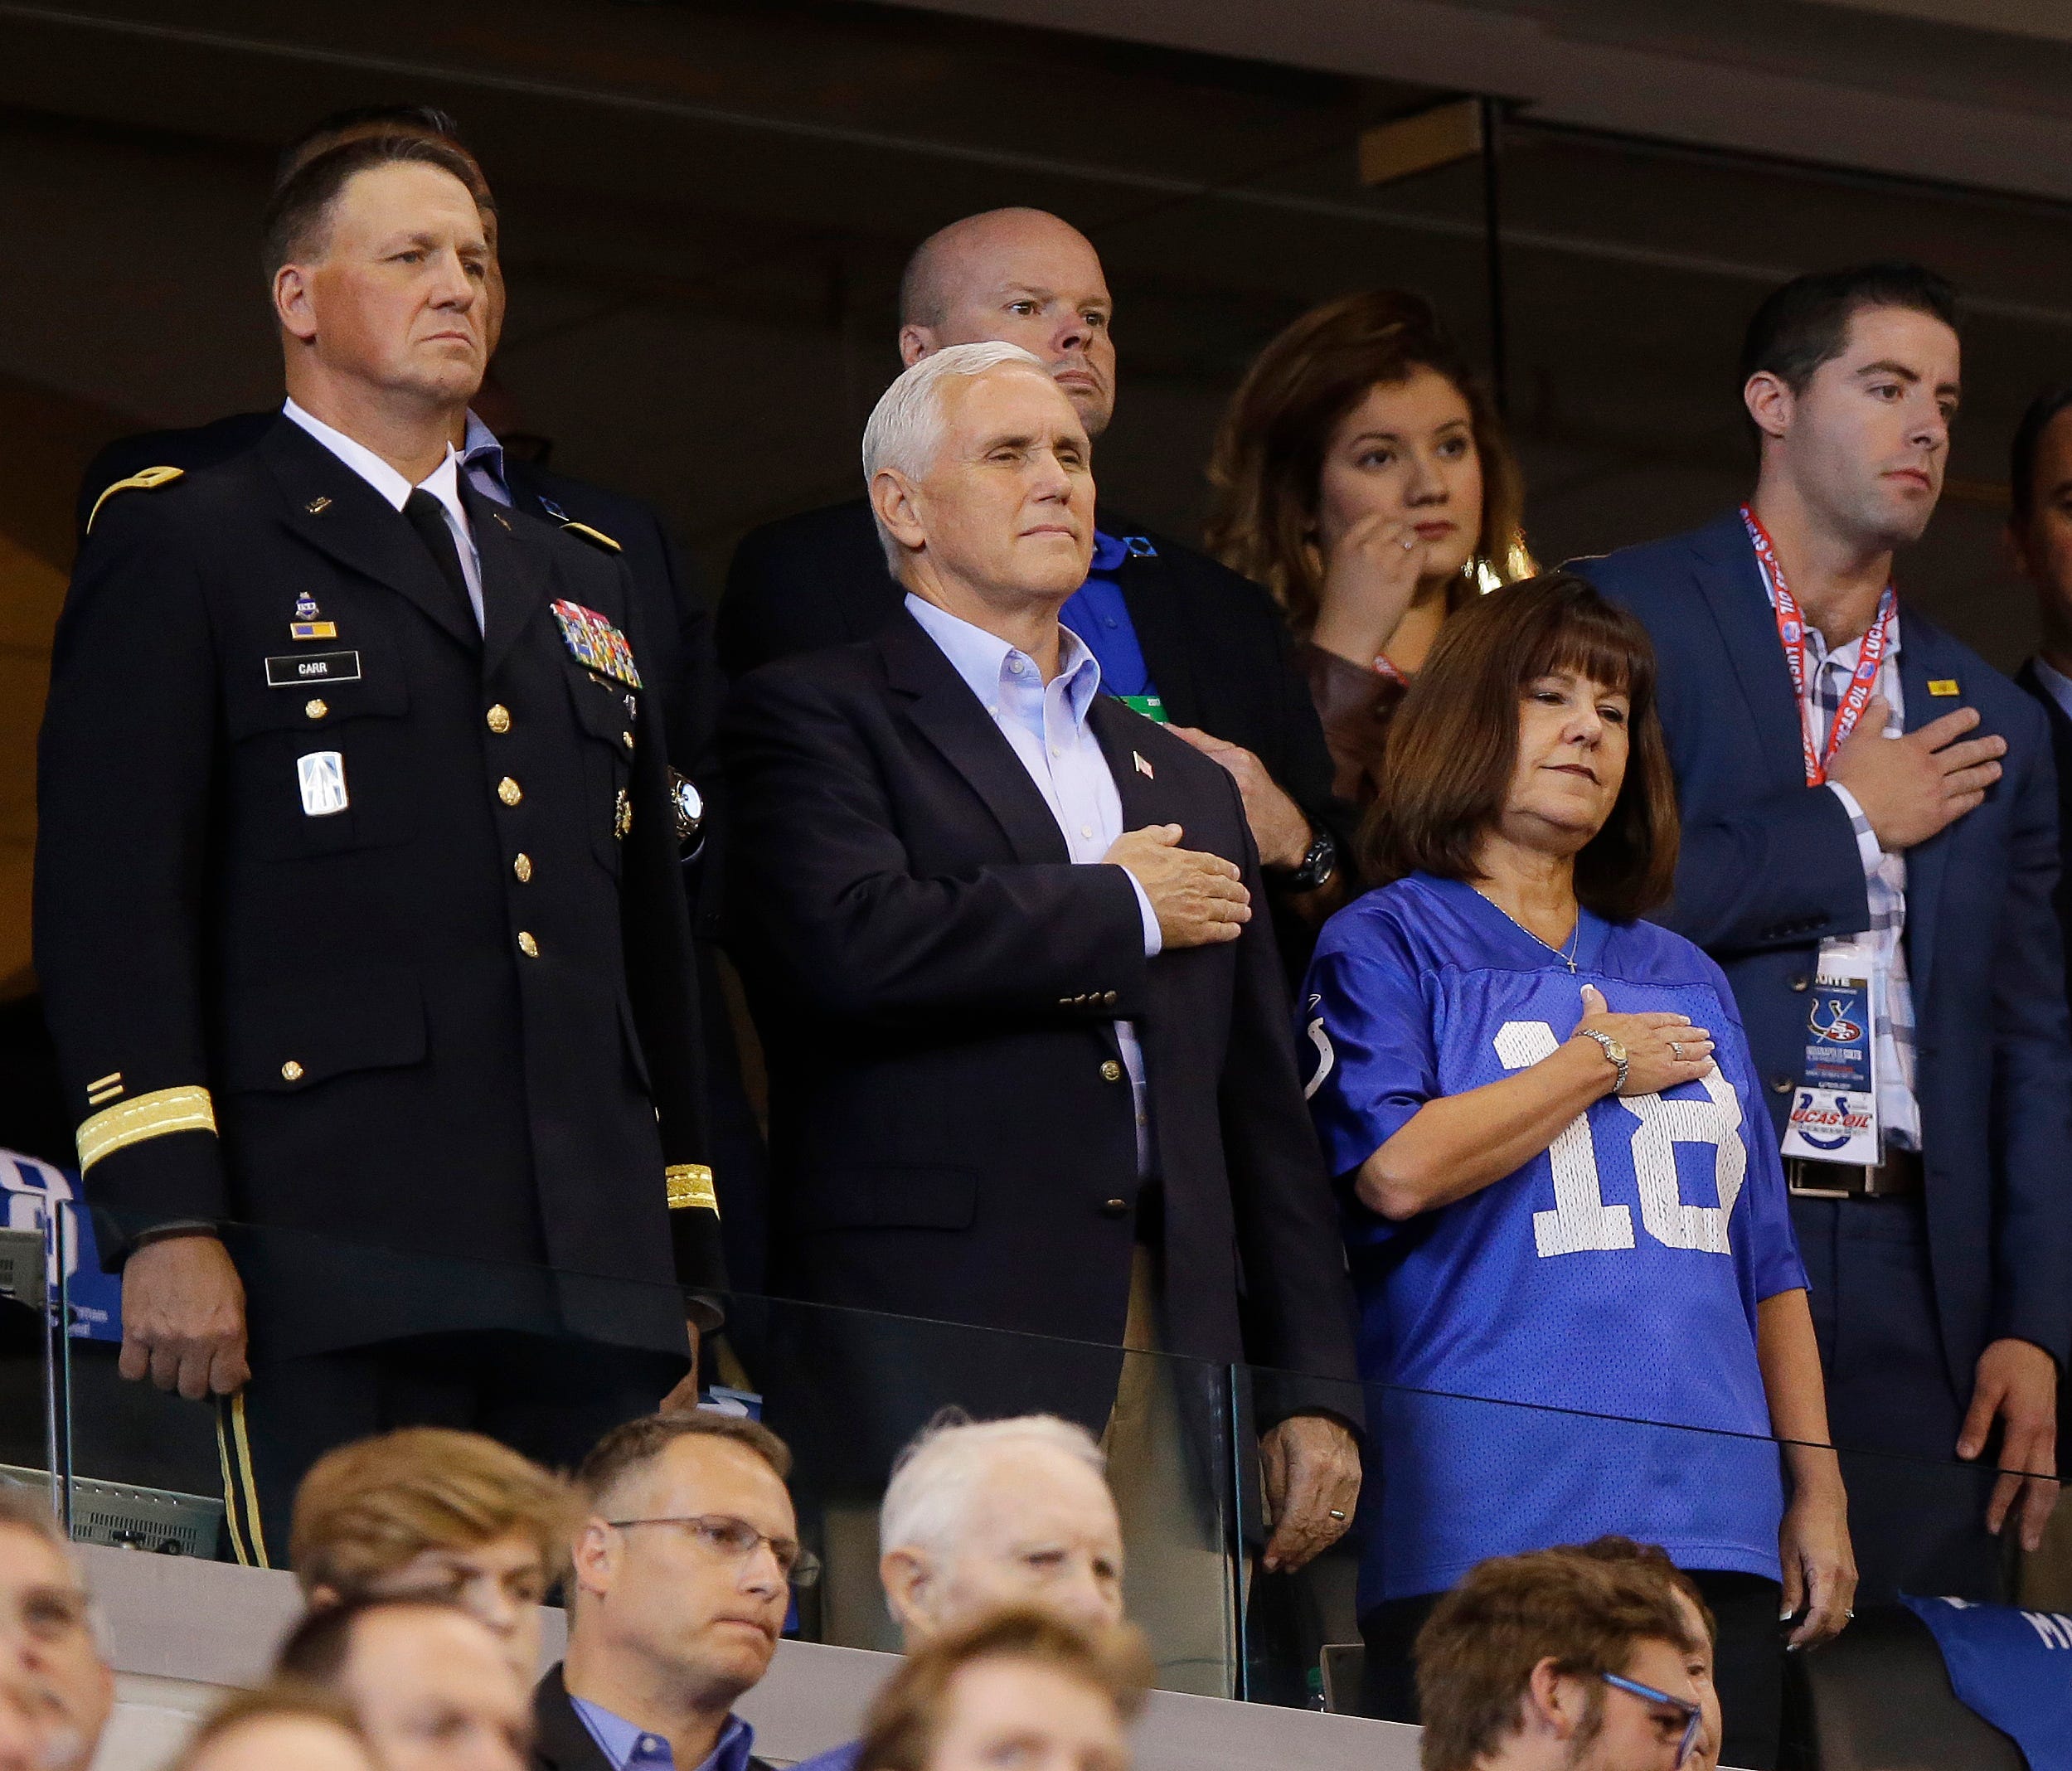 Vice President Mike Pence stands during the playing of the national anthem before an NFL football game between the Indianapolis Colts and the San Francisco 49ers, Sunday, Oct. 8, 2017, in Indianapolis.